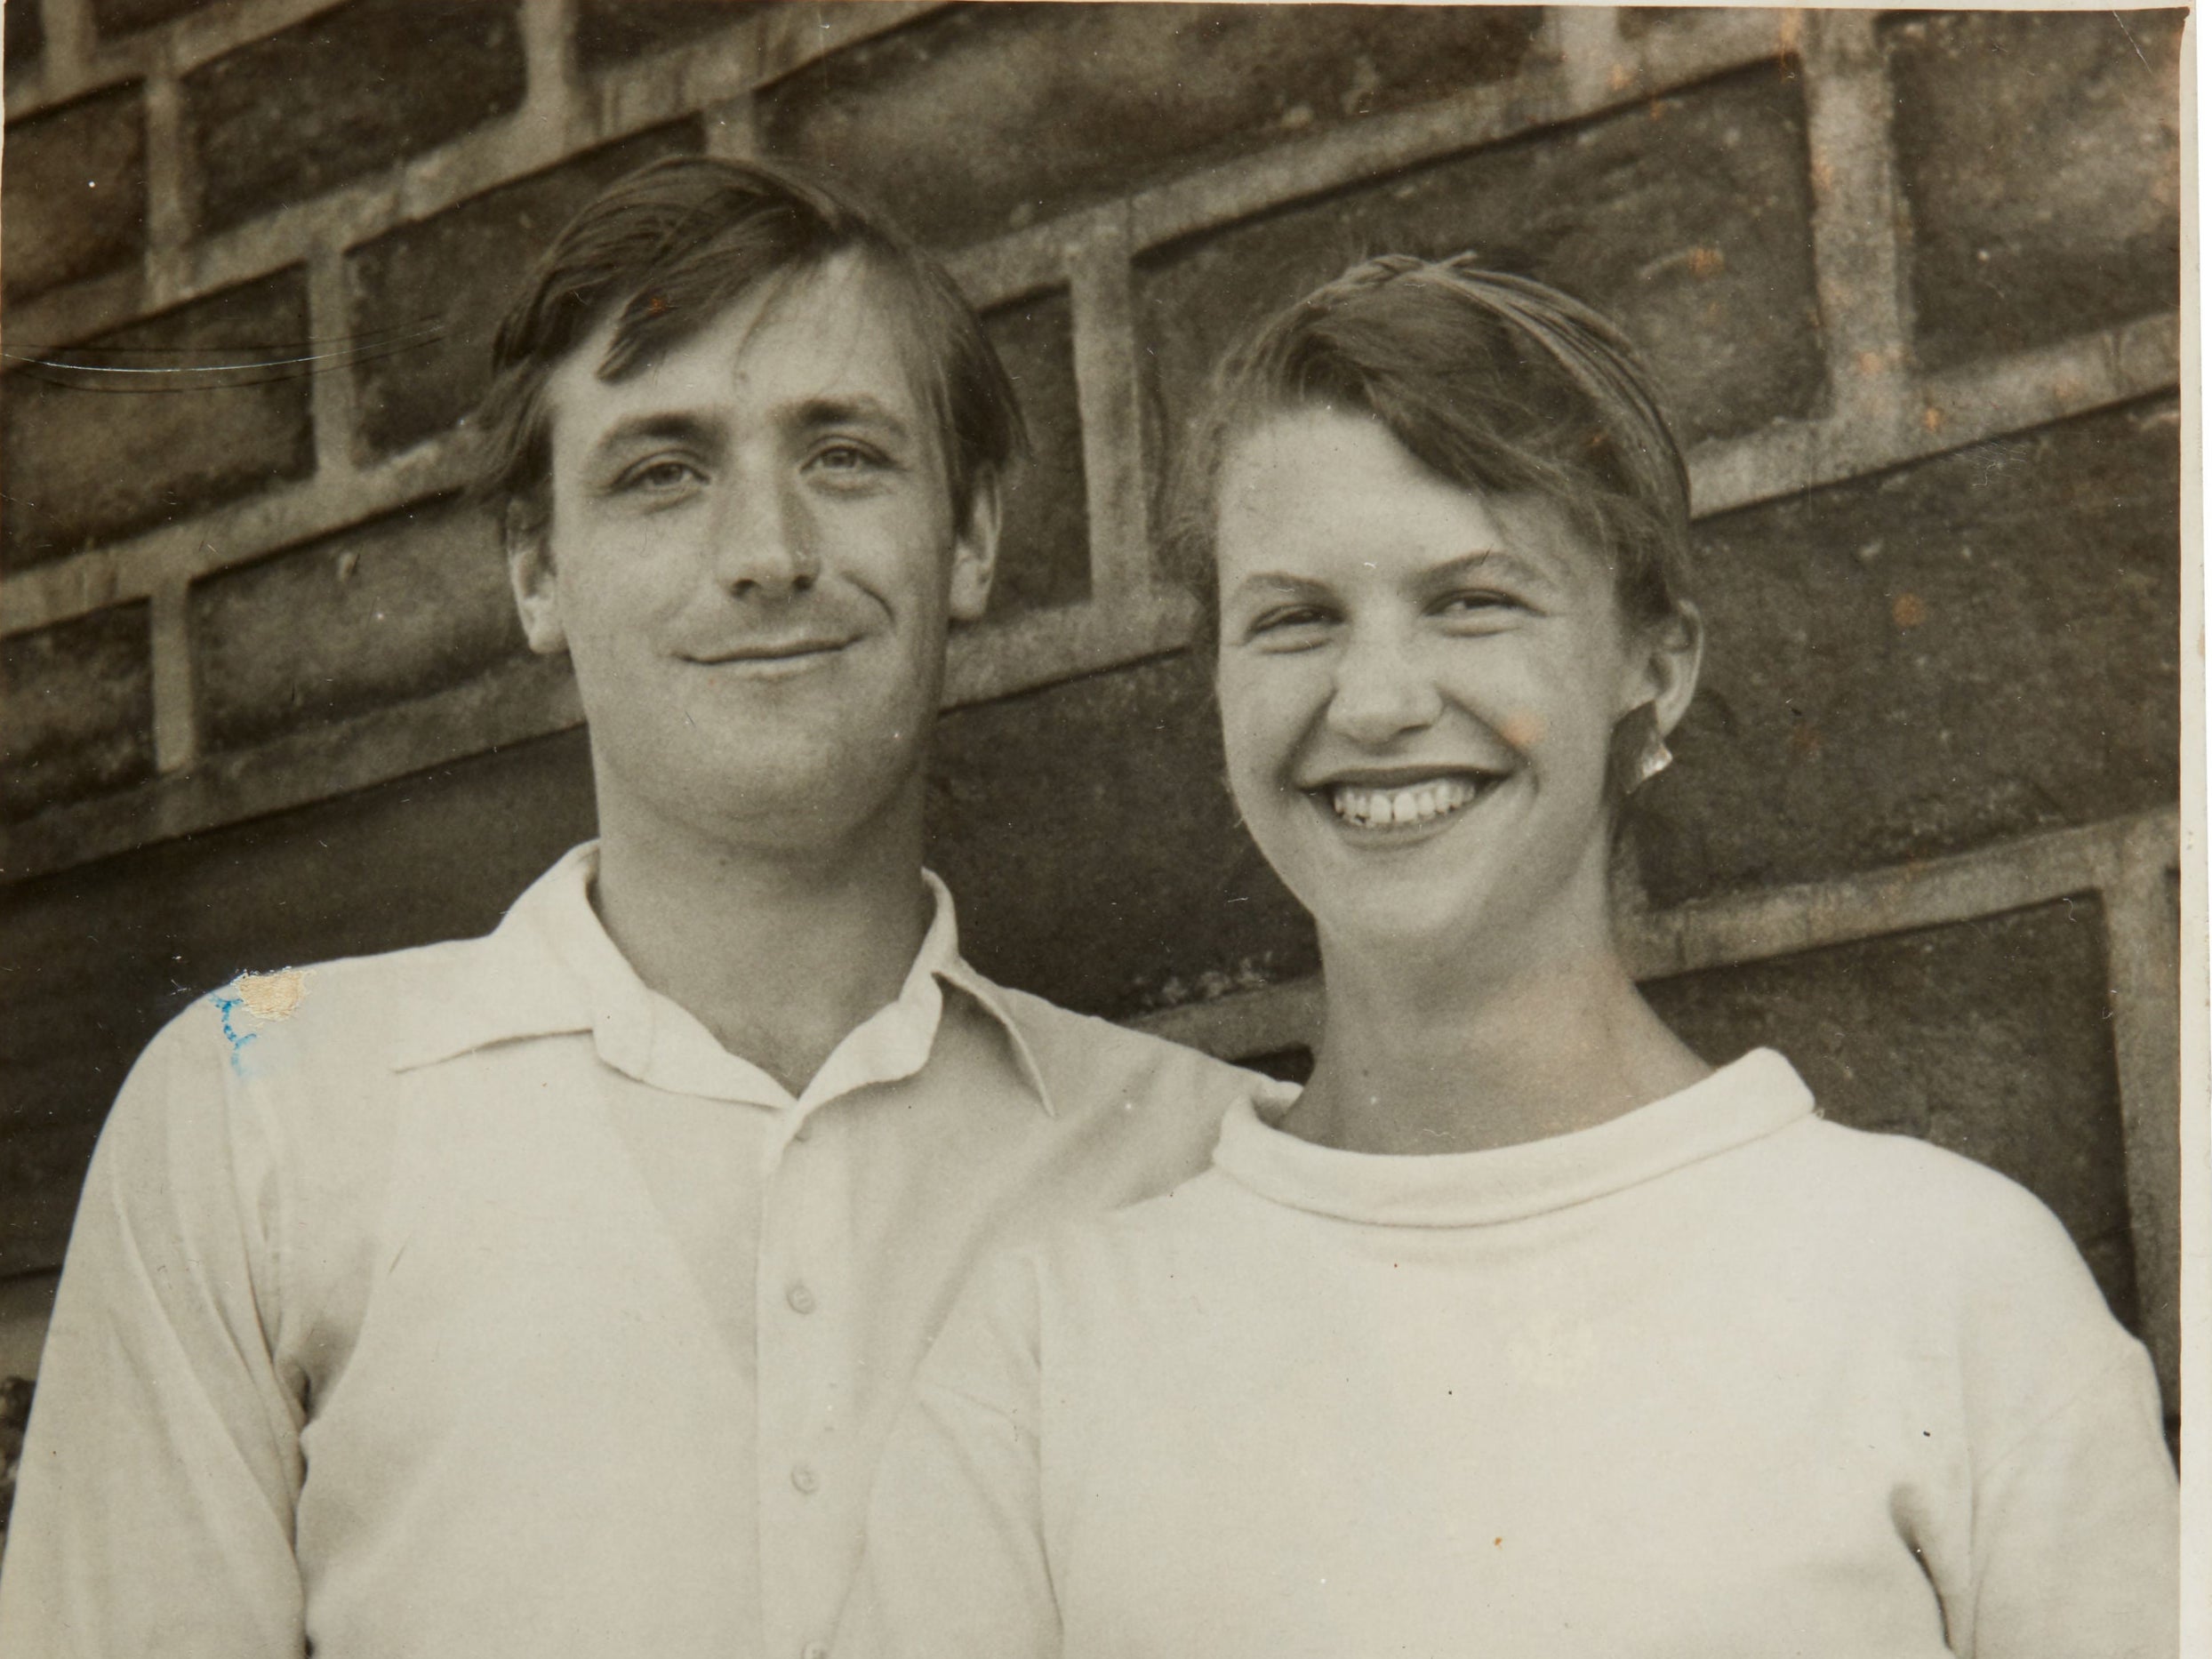 Undated photo of poets Ted Hughes and Sylvia Plath